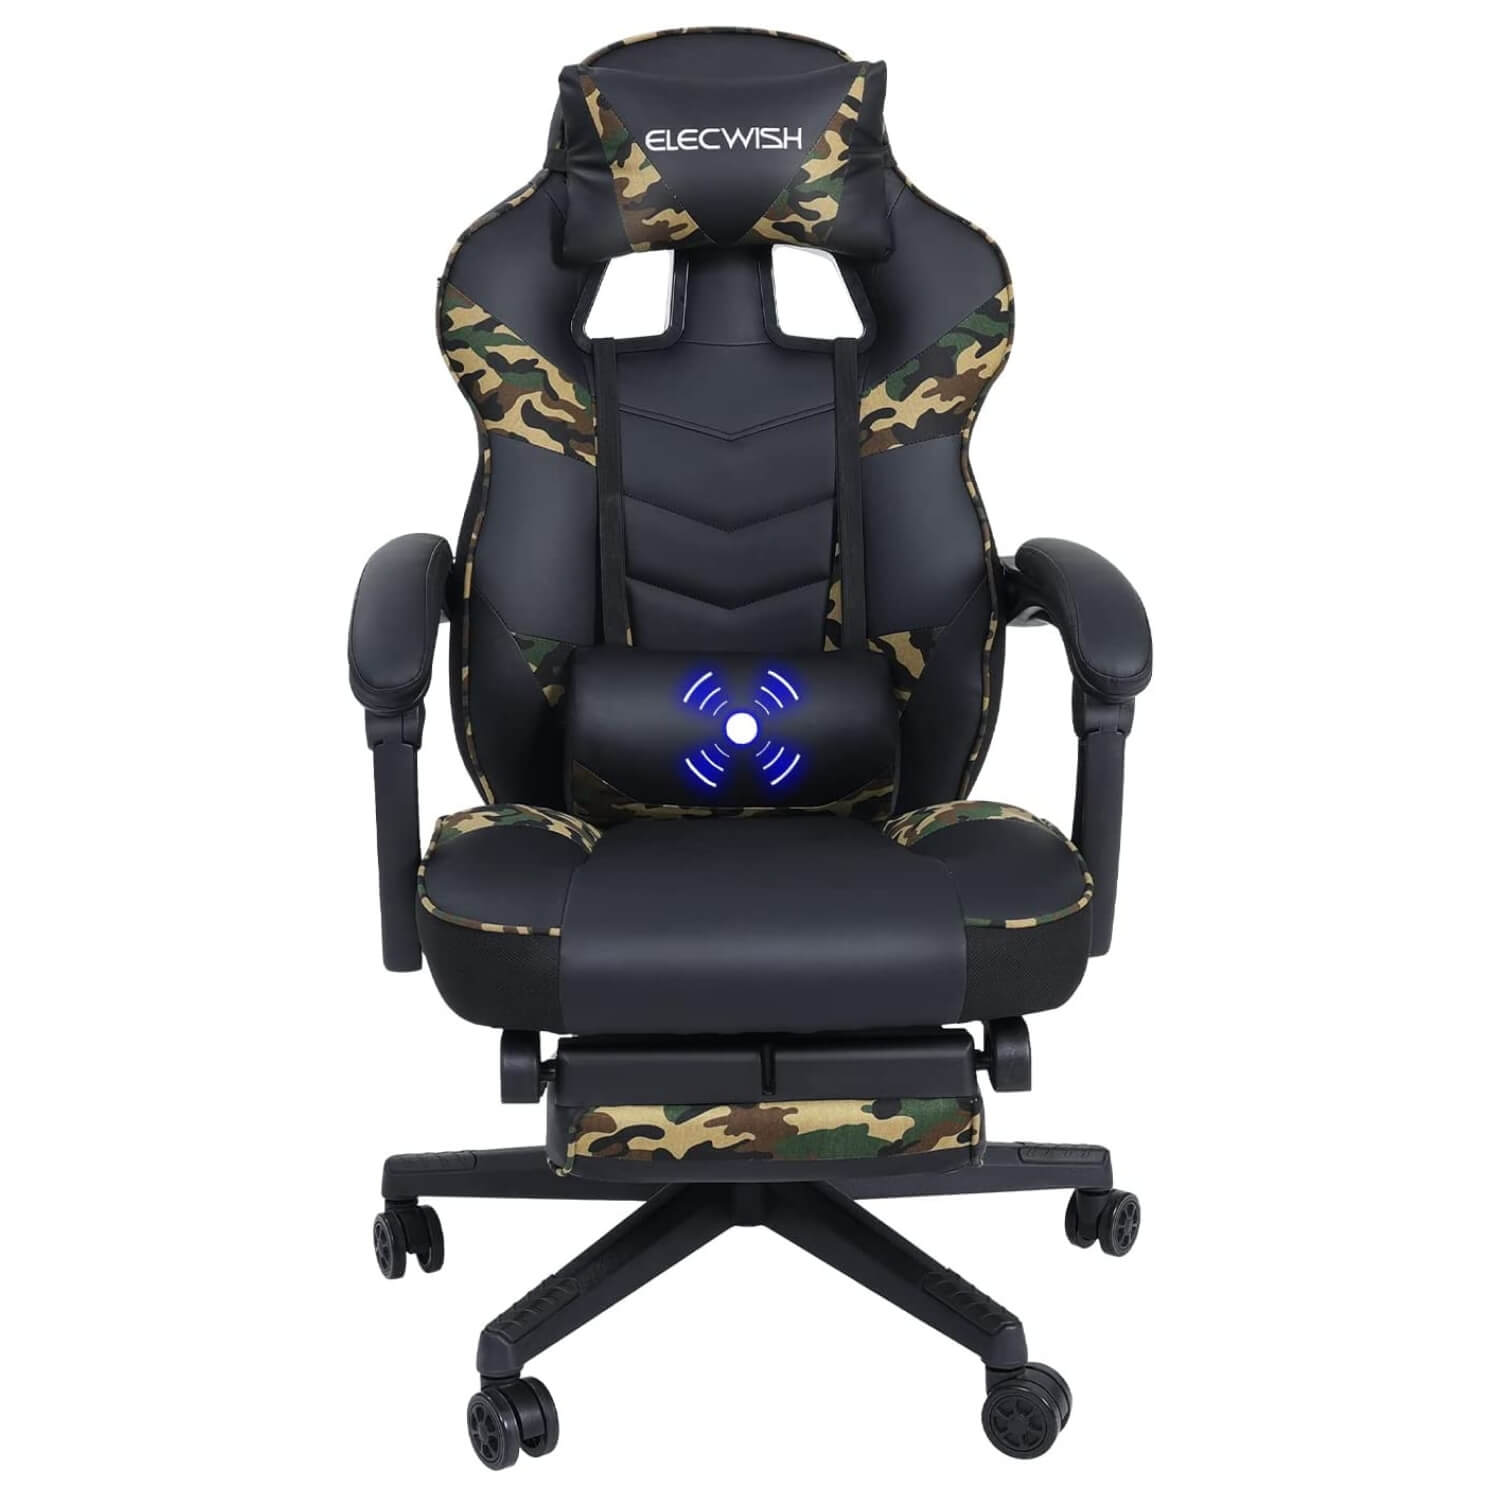 Elecwish massage gaming chair with footrest OC112 camouflage front view